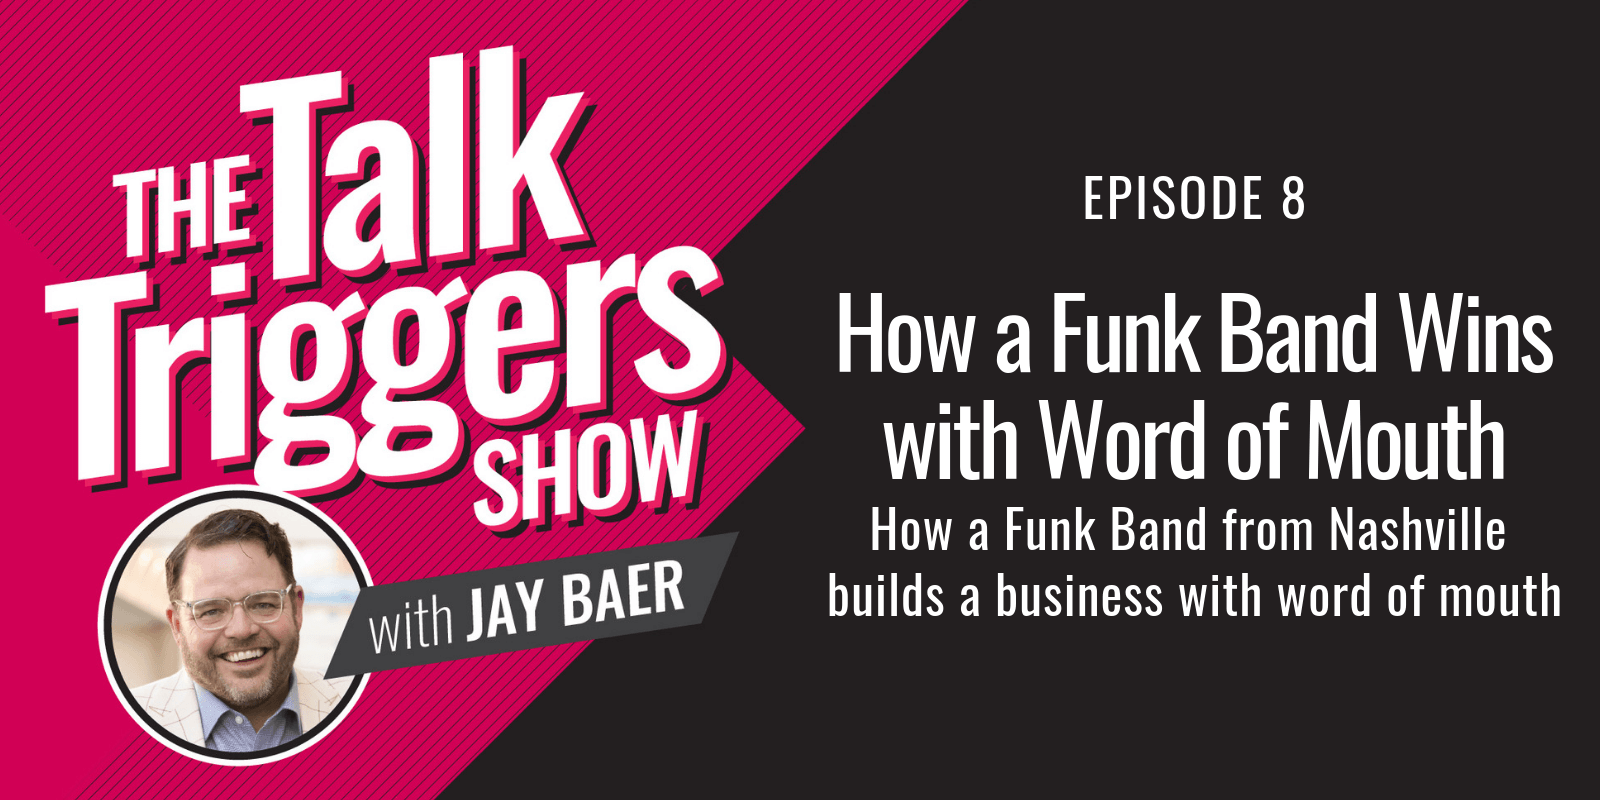 How a Funk Band Wins with Word of Mouth